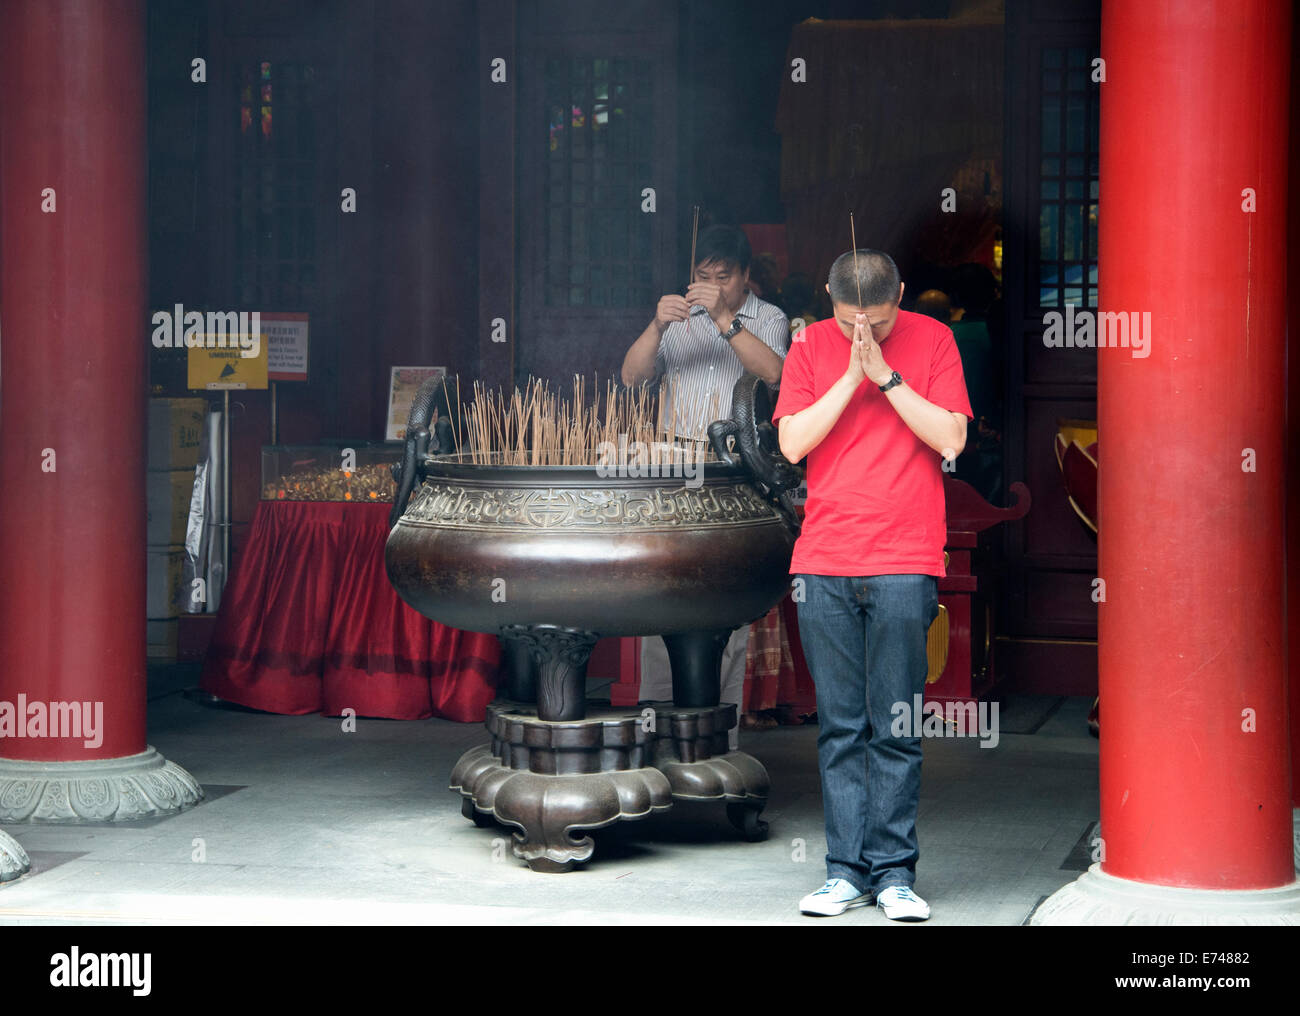 Praying with Incense at Chinese Temple Stock Photo